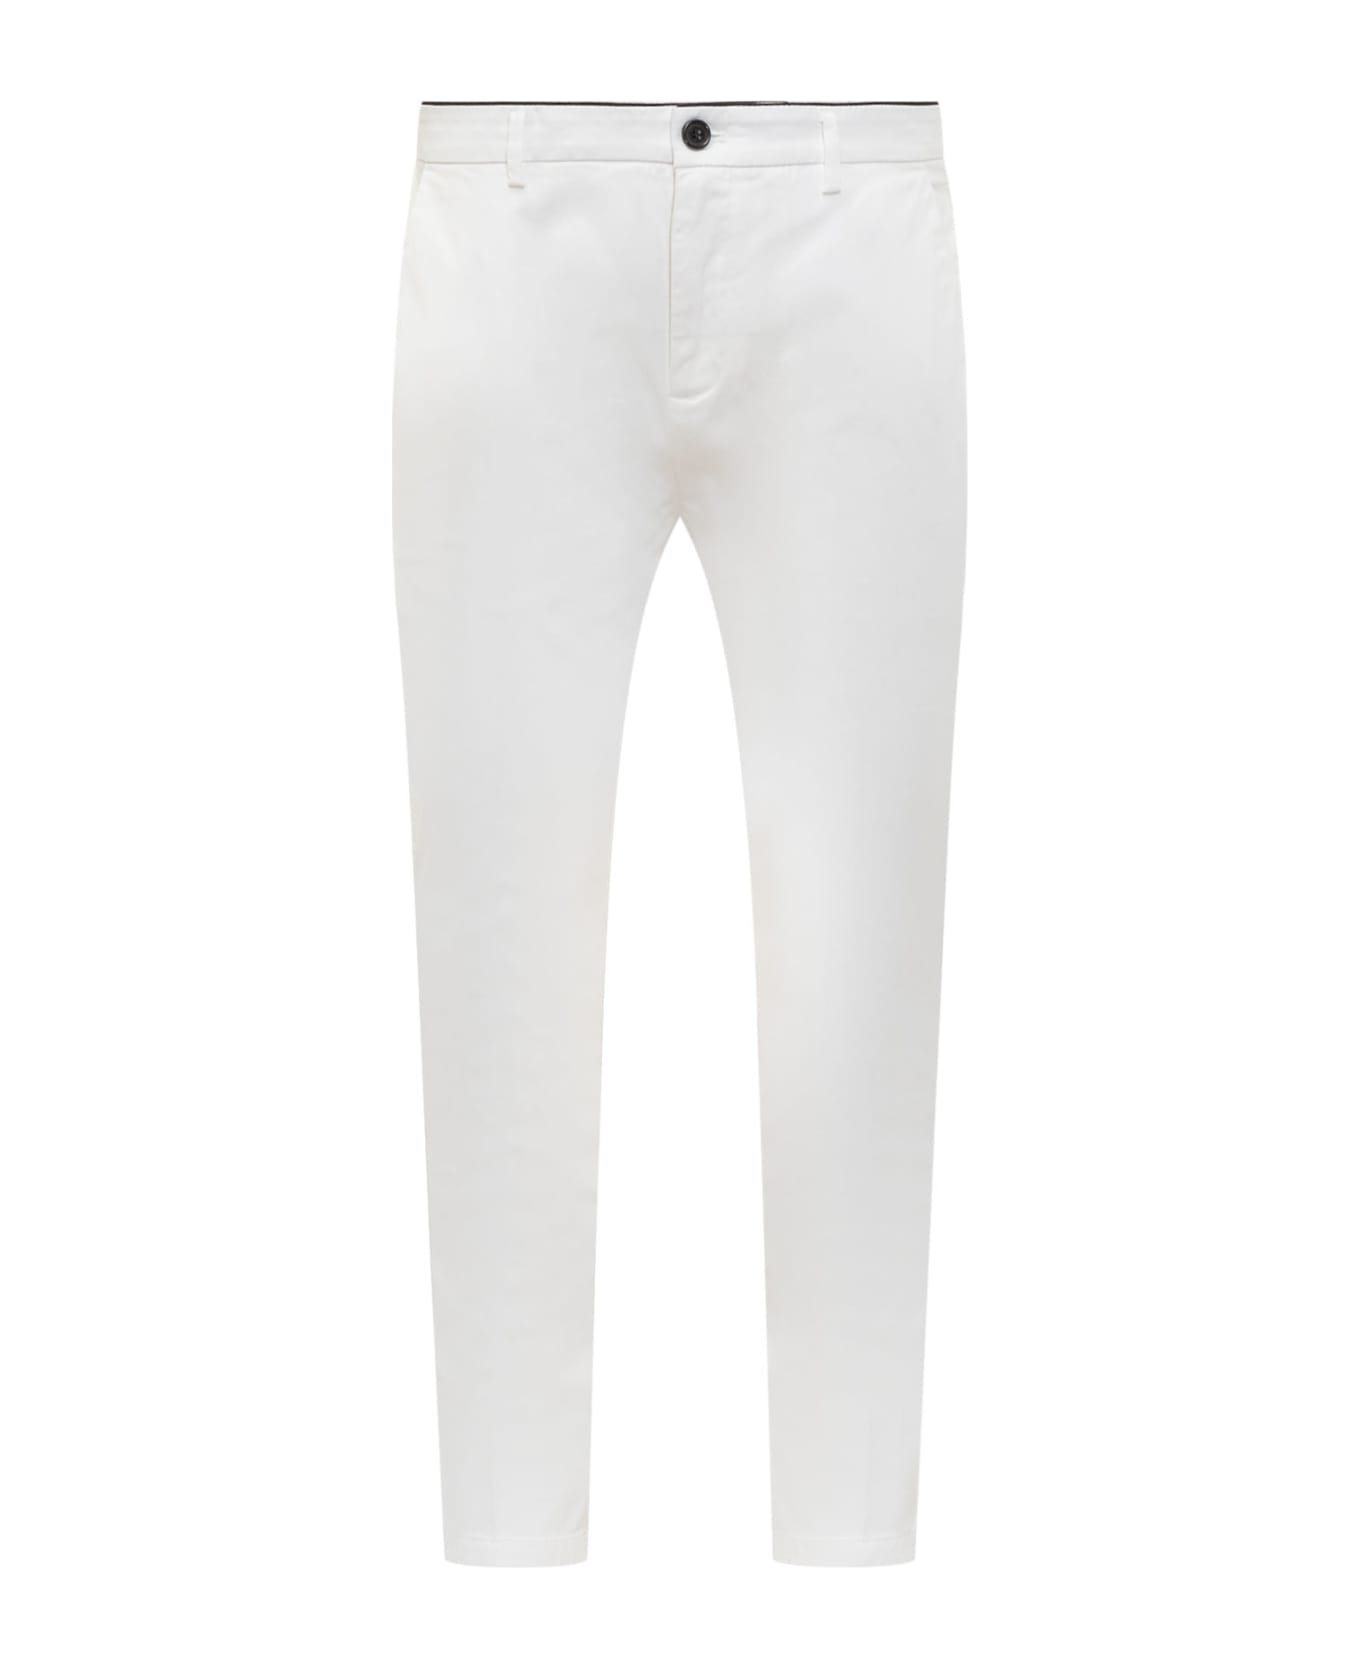 Department Five Prince Chinos Pants - BIANCO